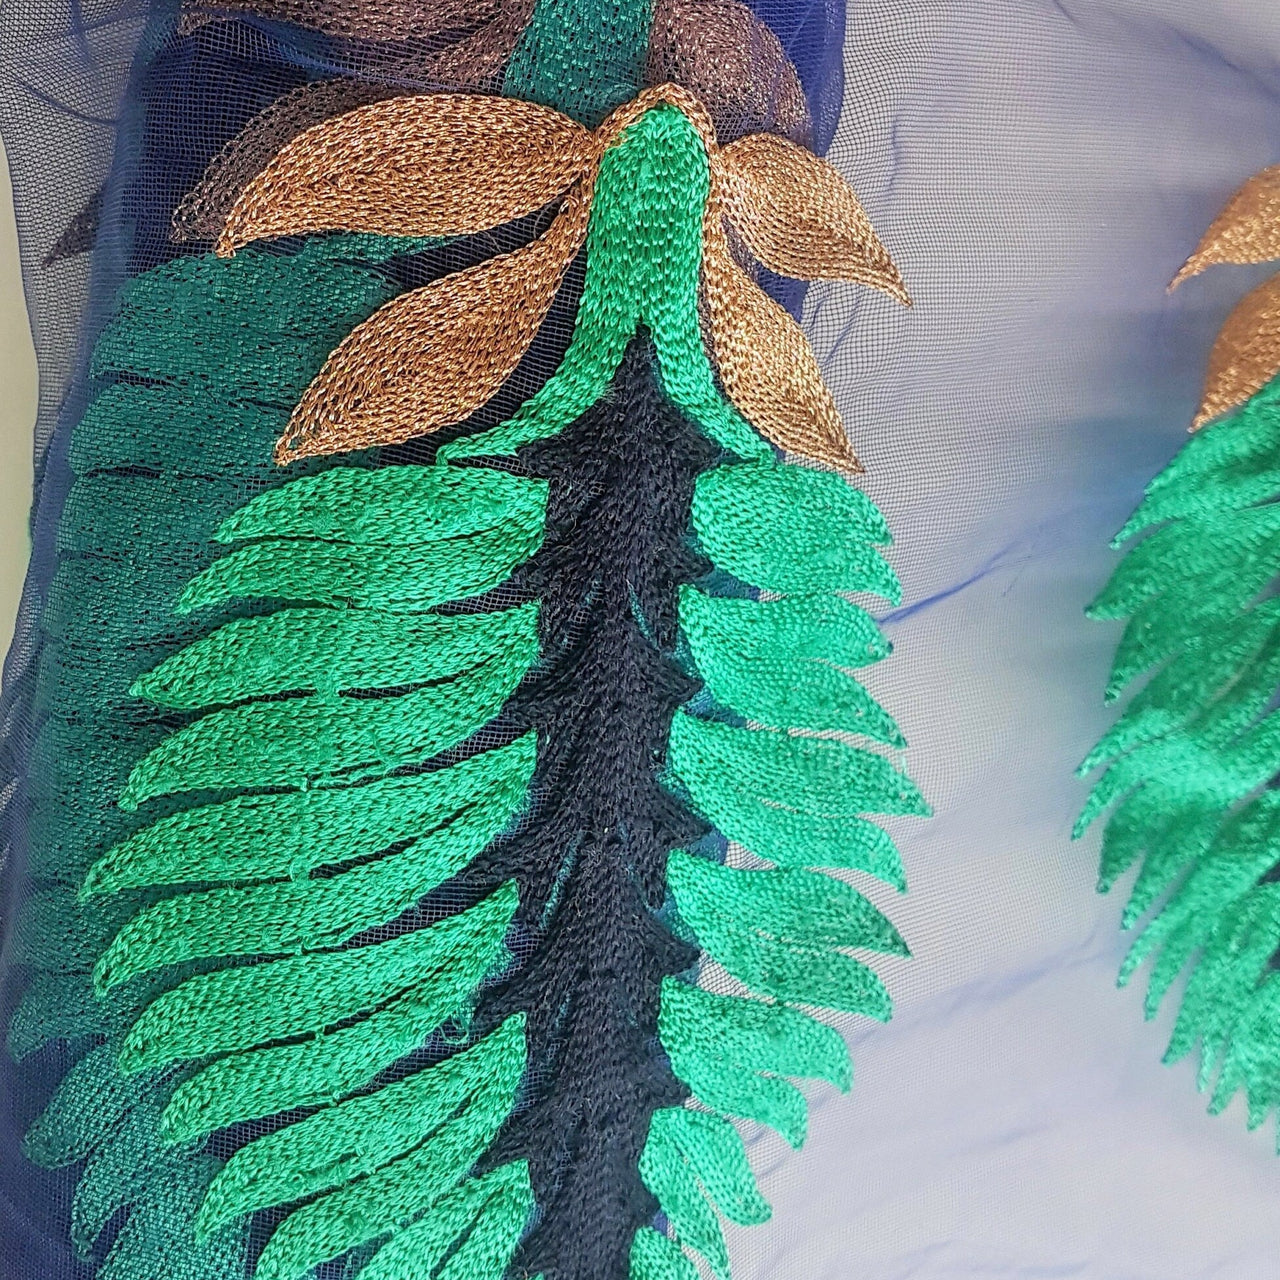 Blue Soft Net Lace Trim With  Blue, Green And Gold Embroidered Leaves, Indian Trims